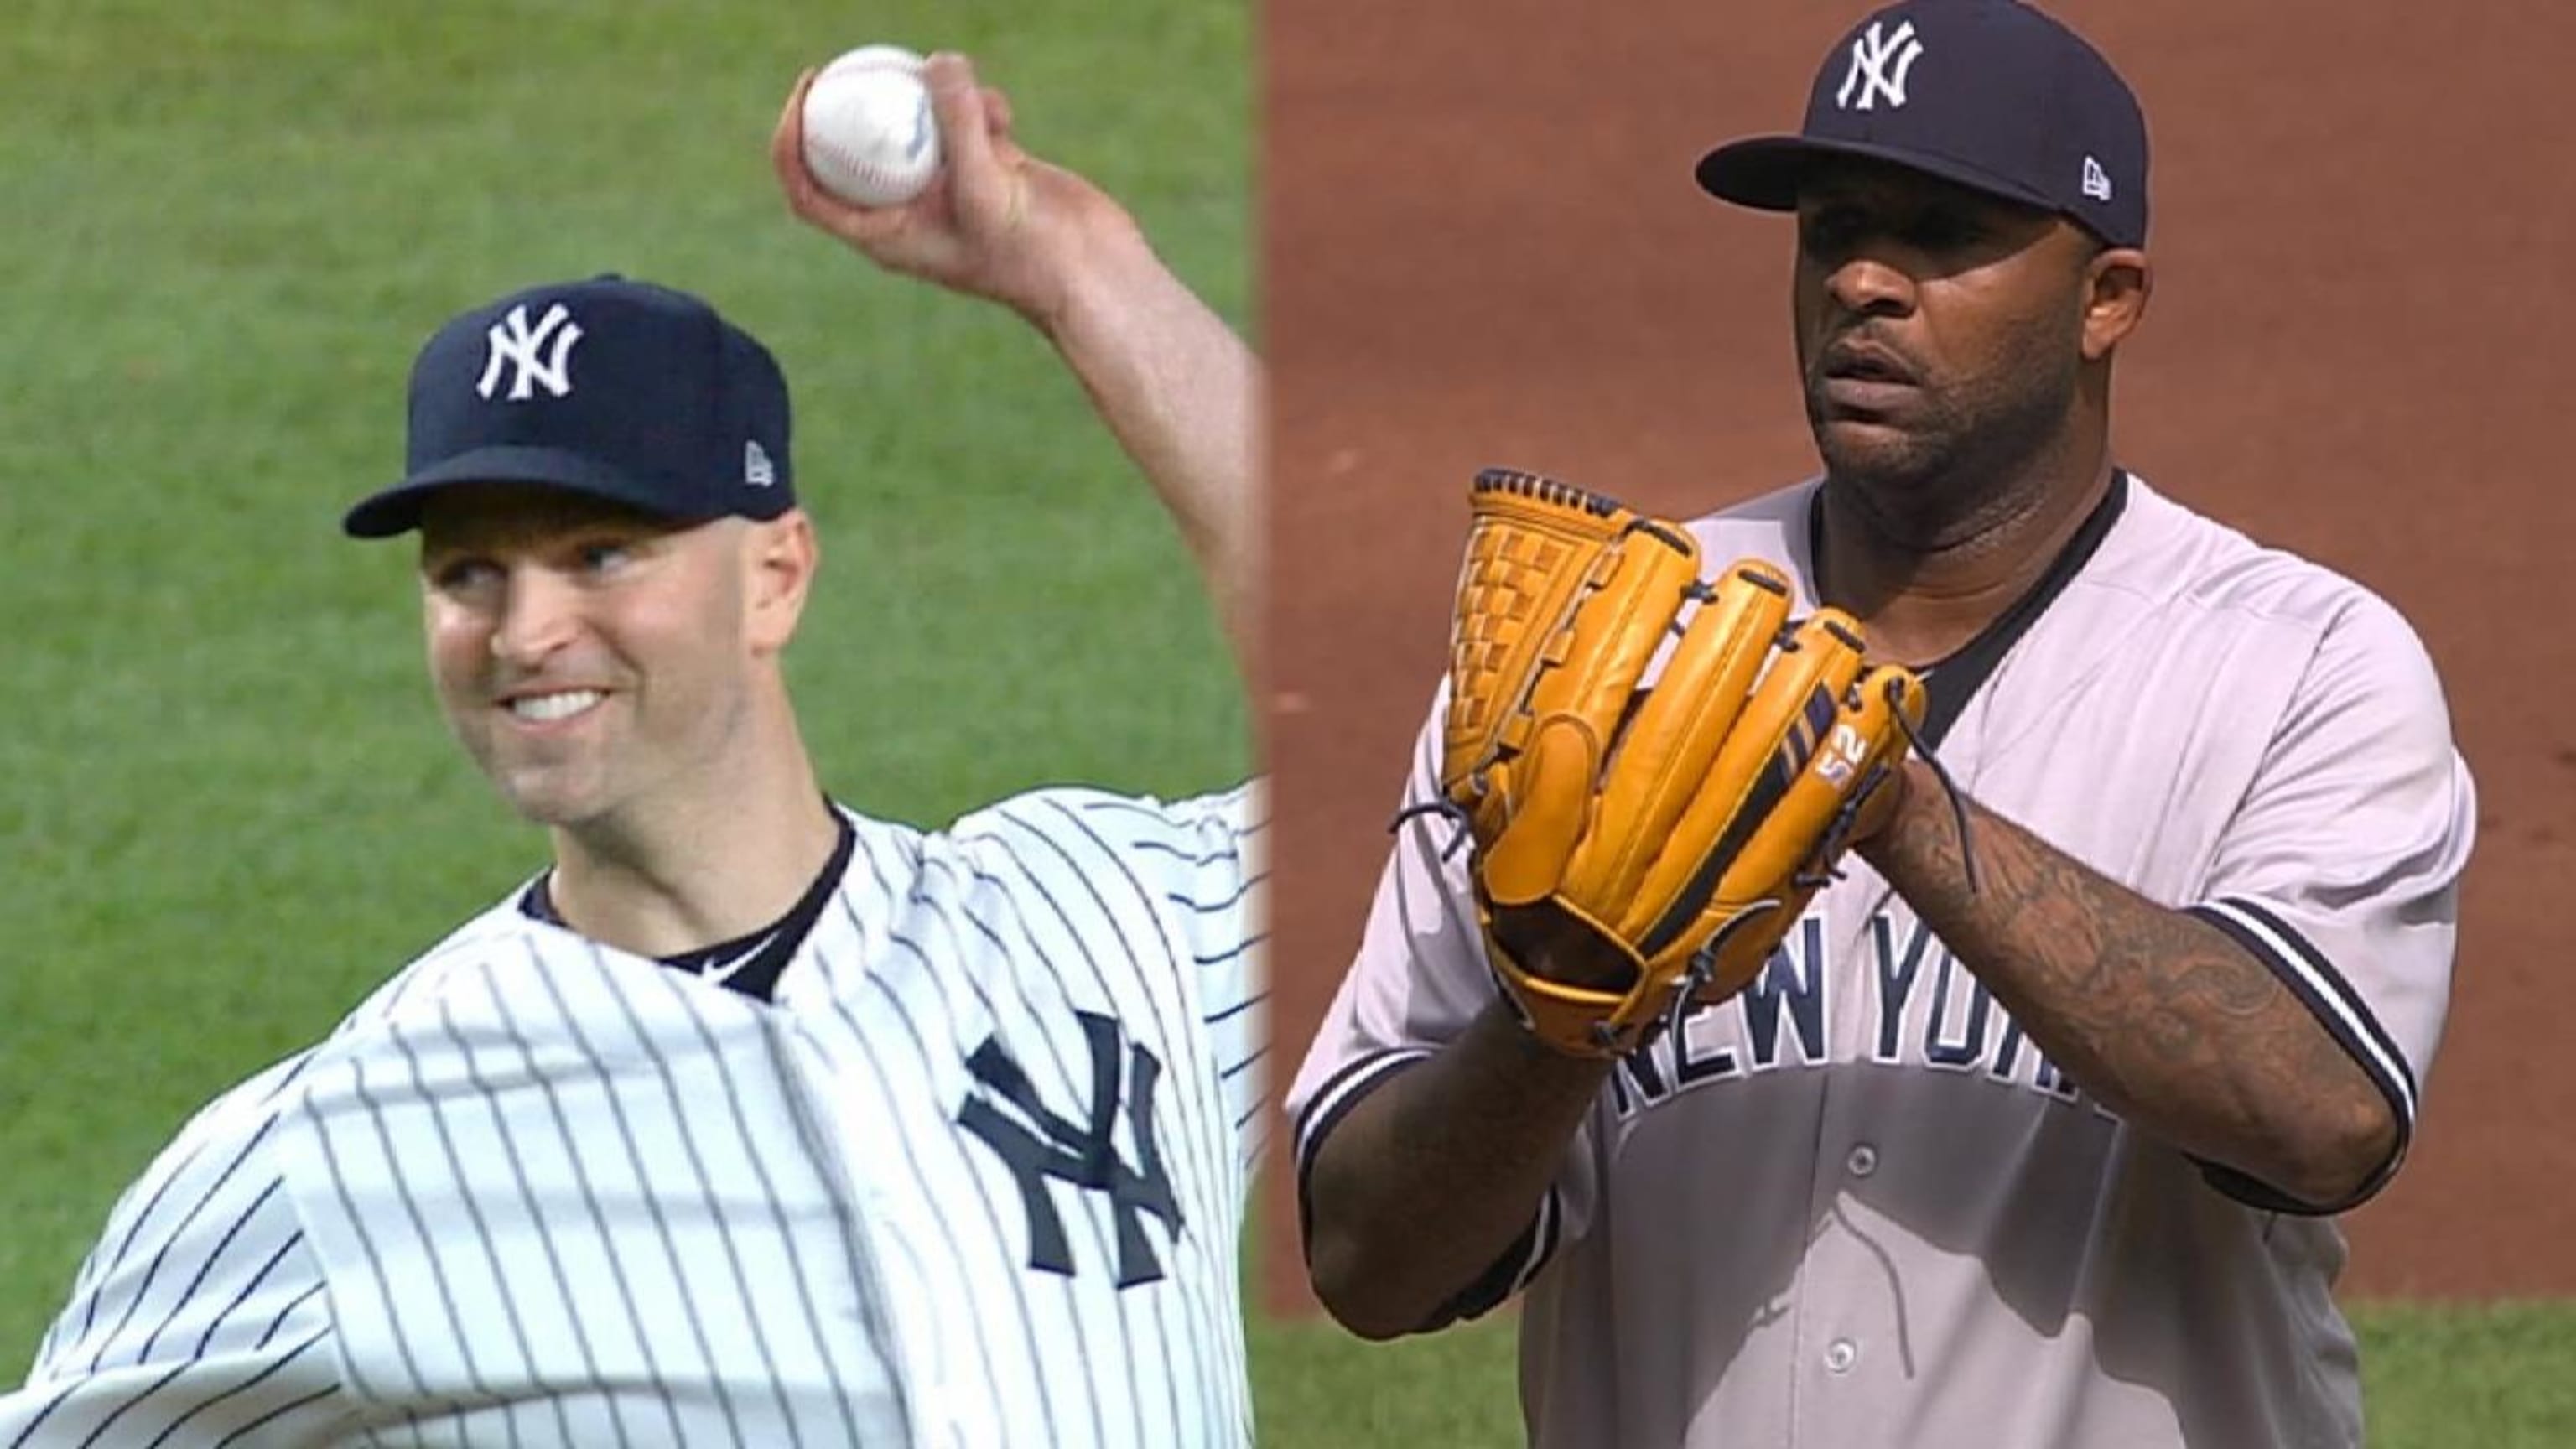 Could C.C. Sabathia be a lefty option for the 2018 Orioles rotation